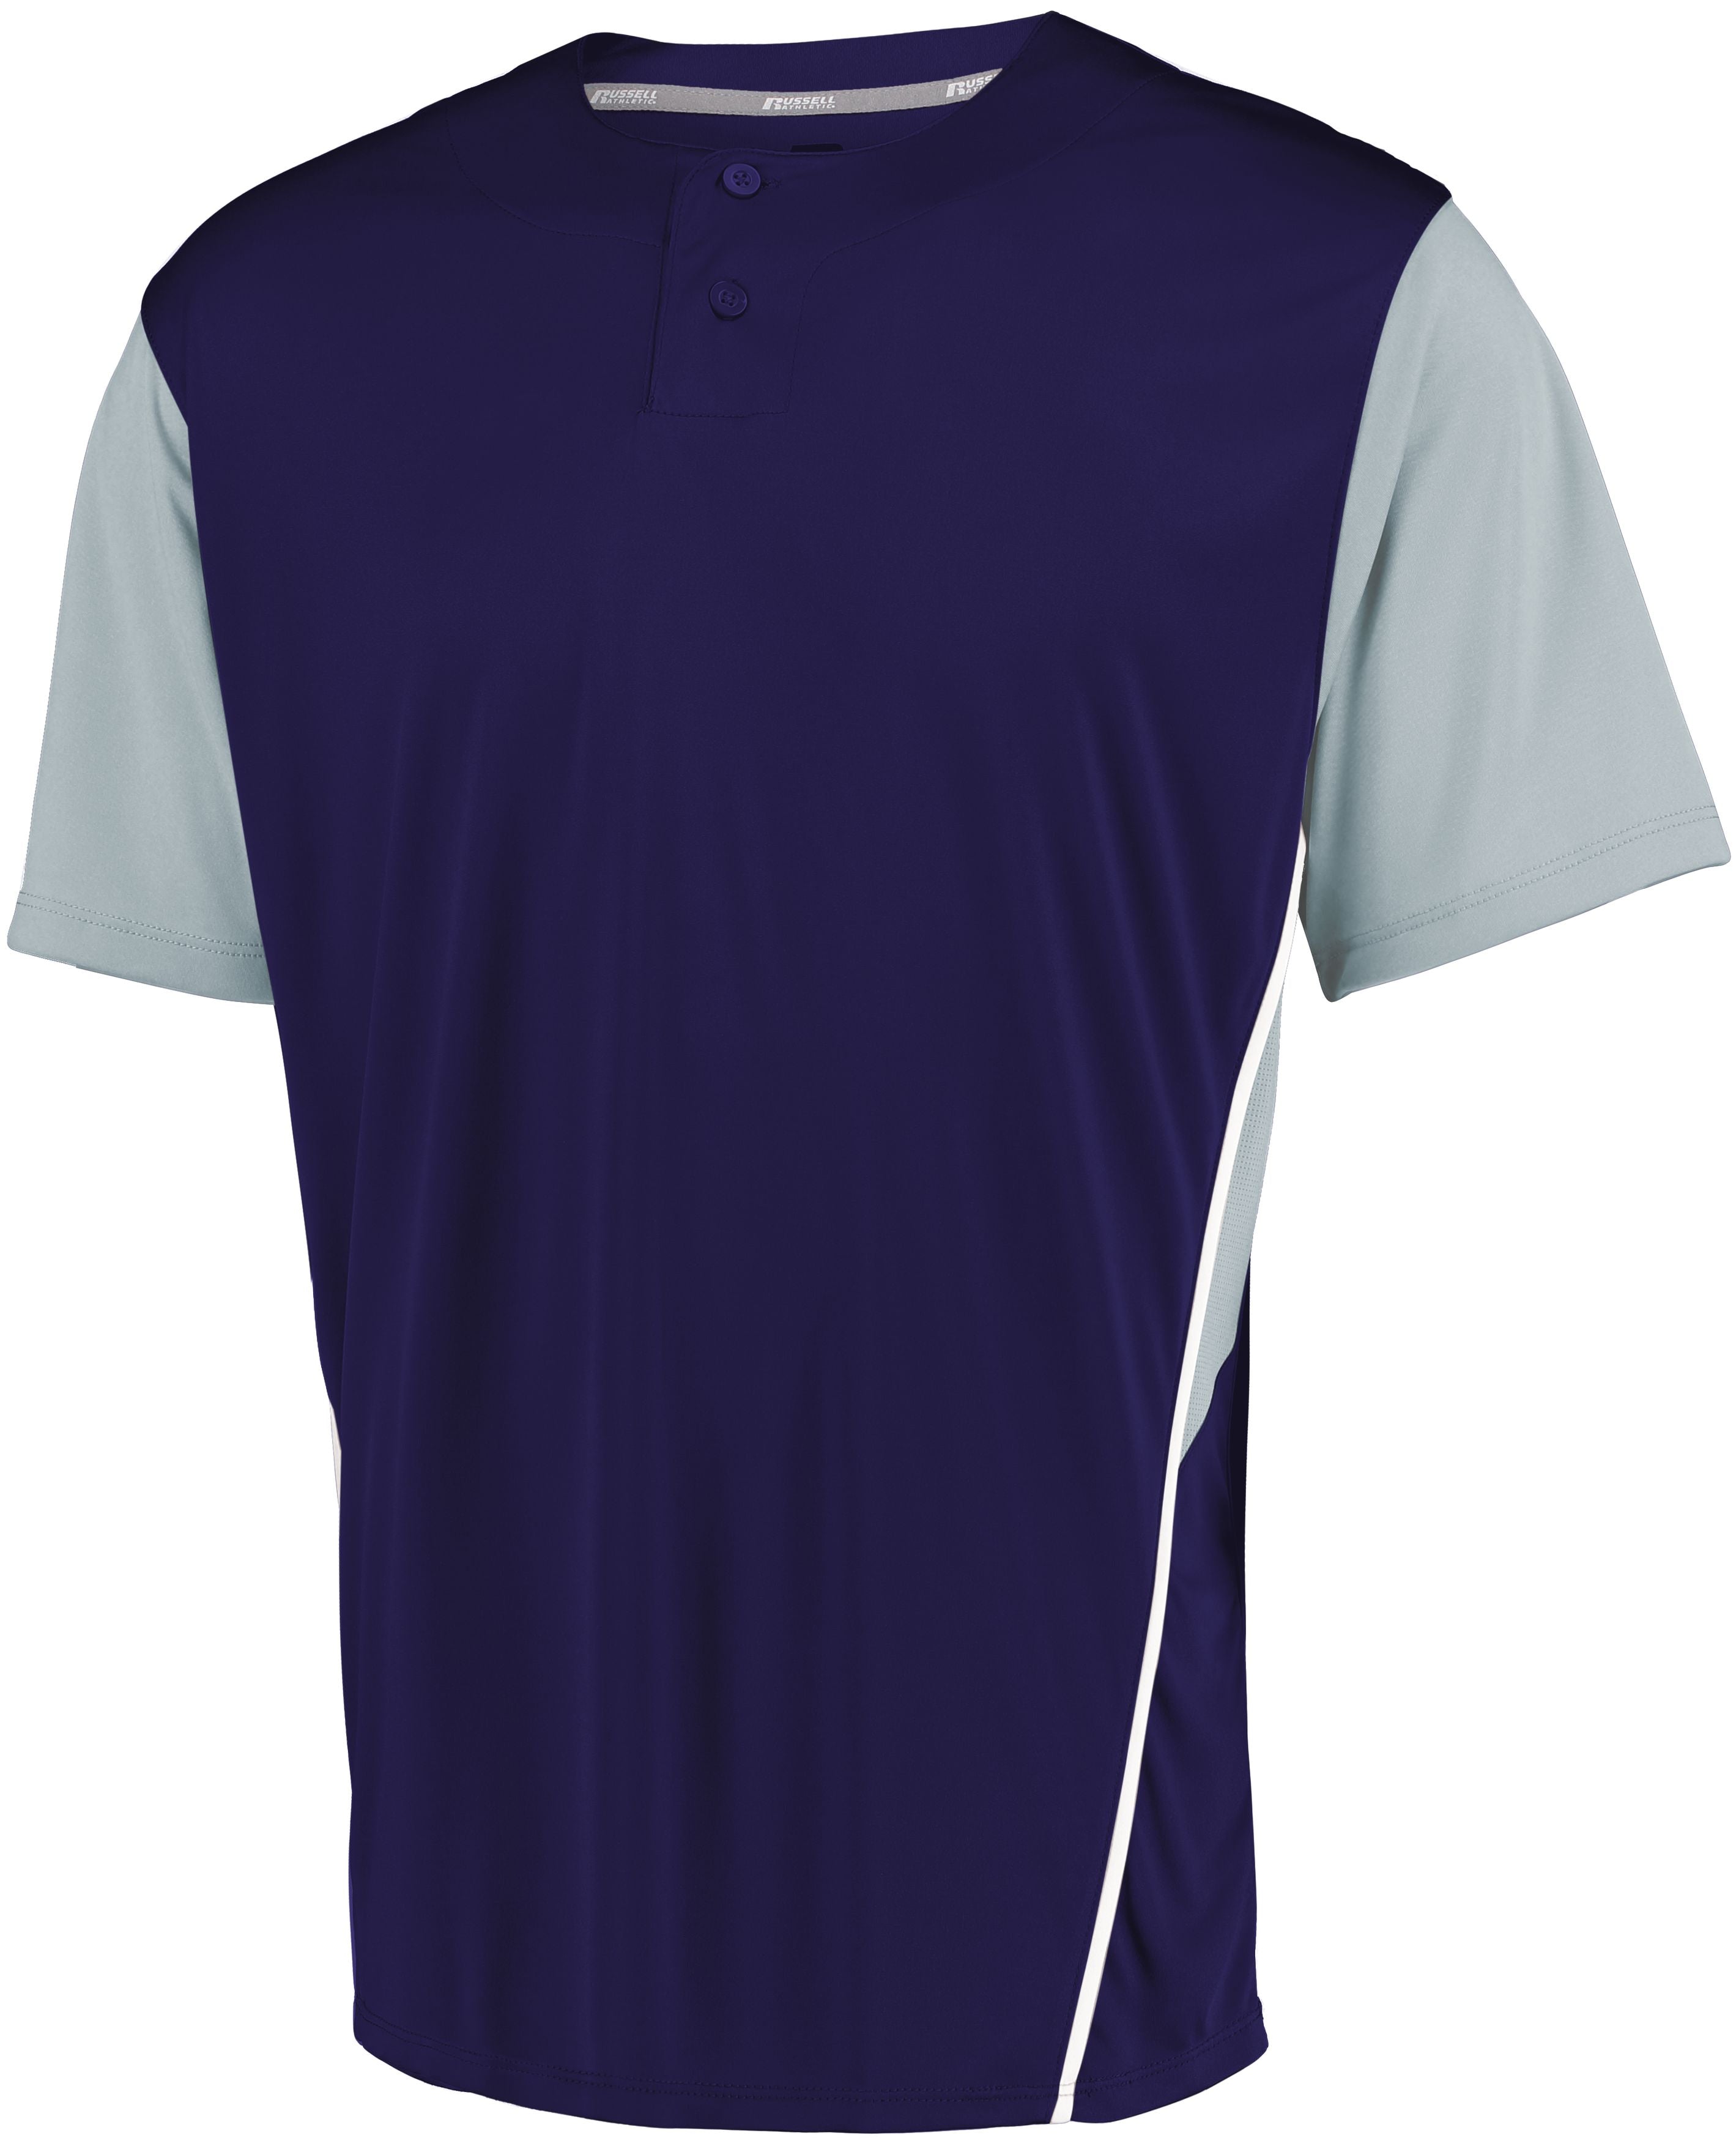 Russell Athletic Youth Two-Button Placket Jersey in Purple/Baseball Grey  -Part of the Youth, Youth-Jersey, Baseball, Russell-Athletic-Products, Shirts, All-Sports, All-Sports-1 product lines at KanaleyCreations.com